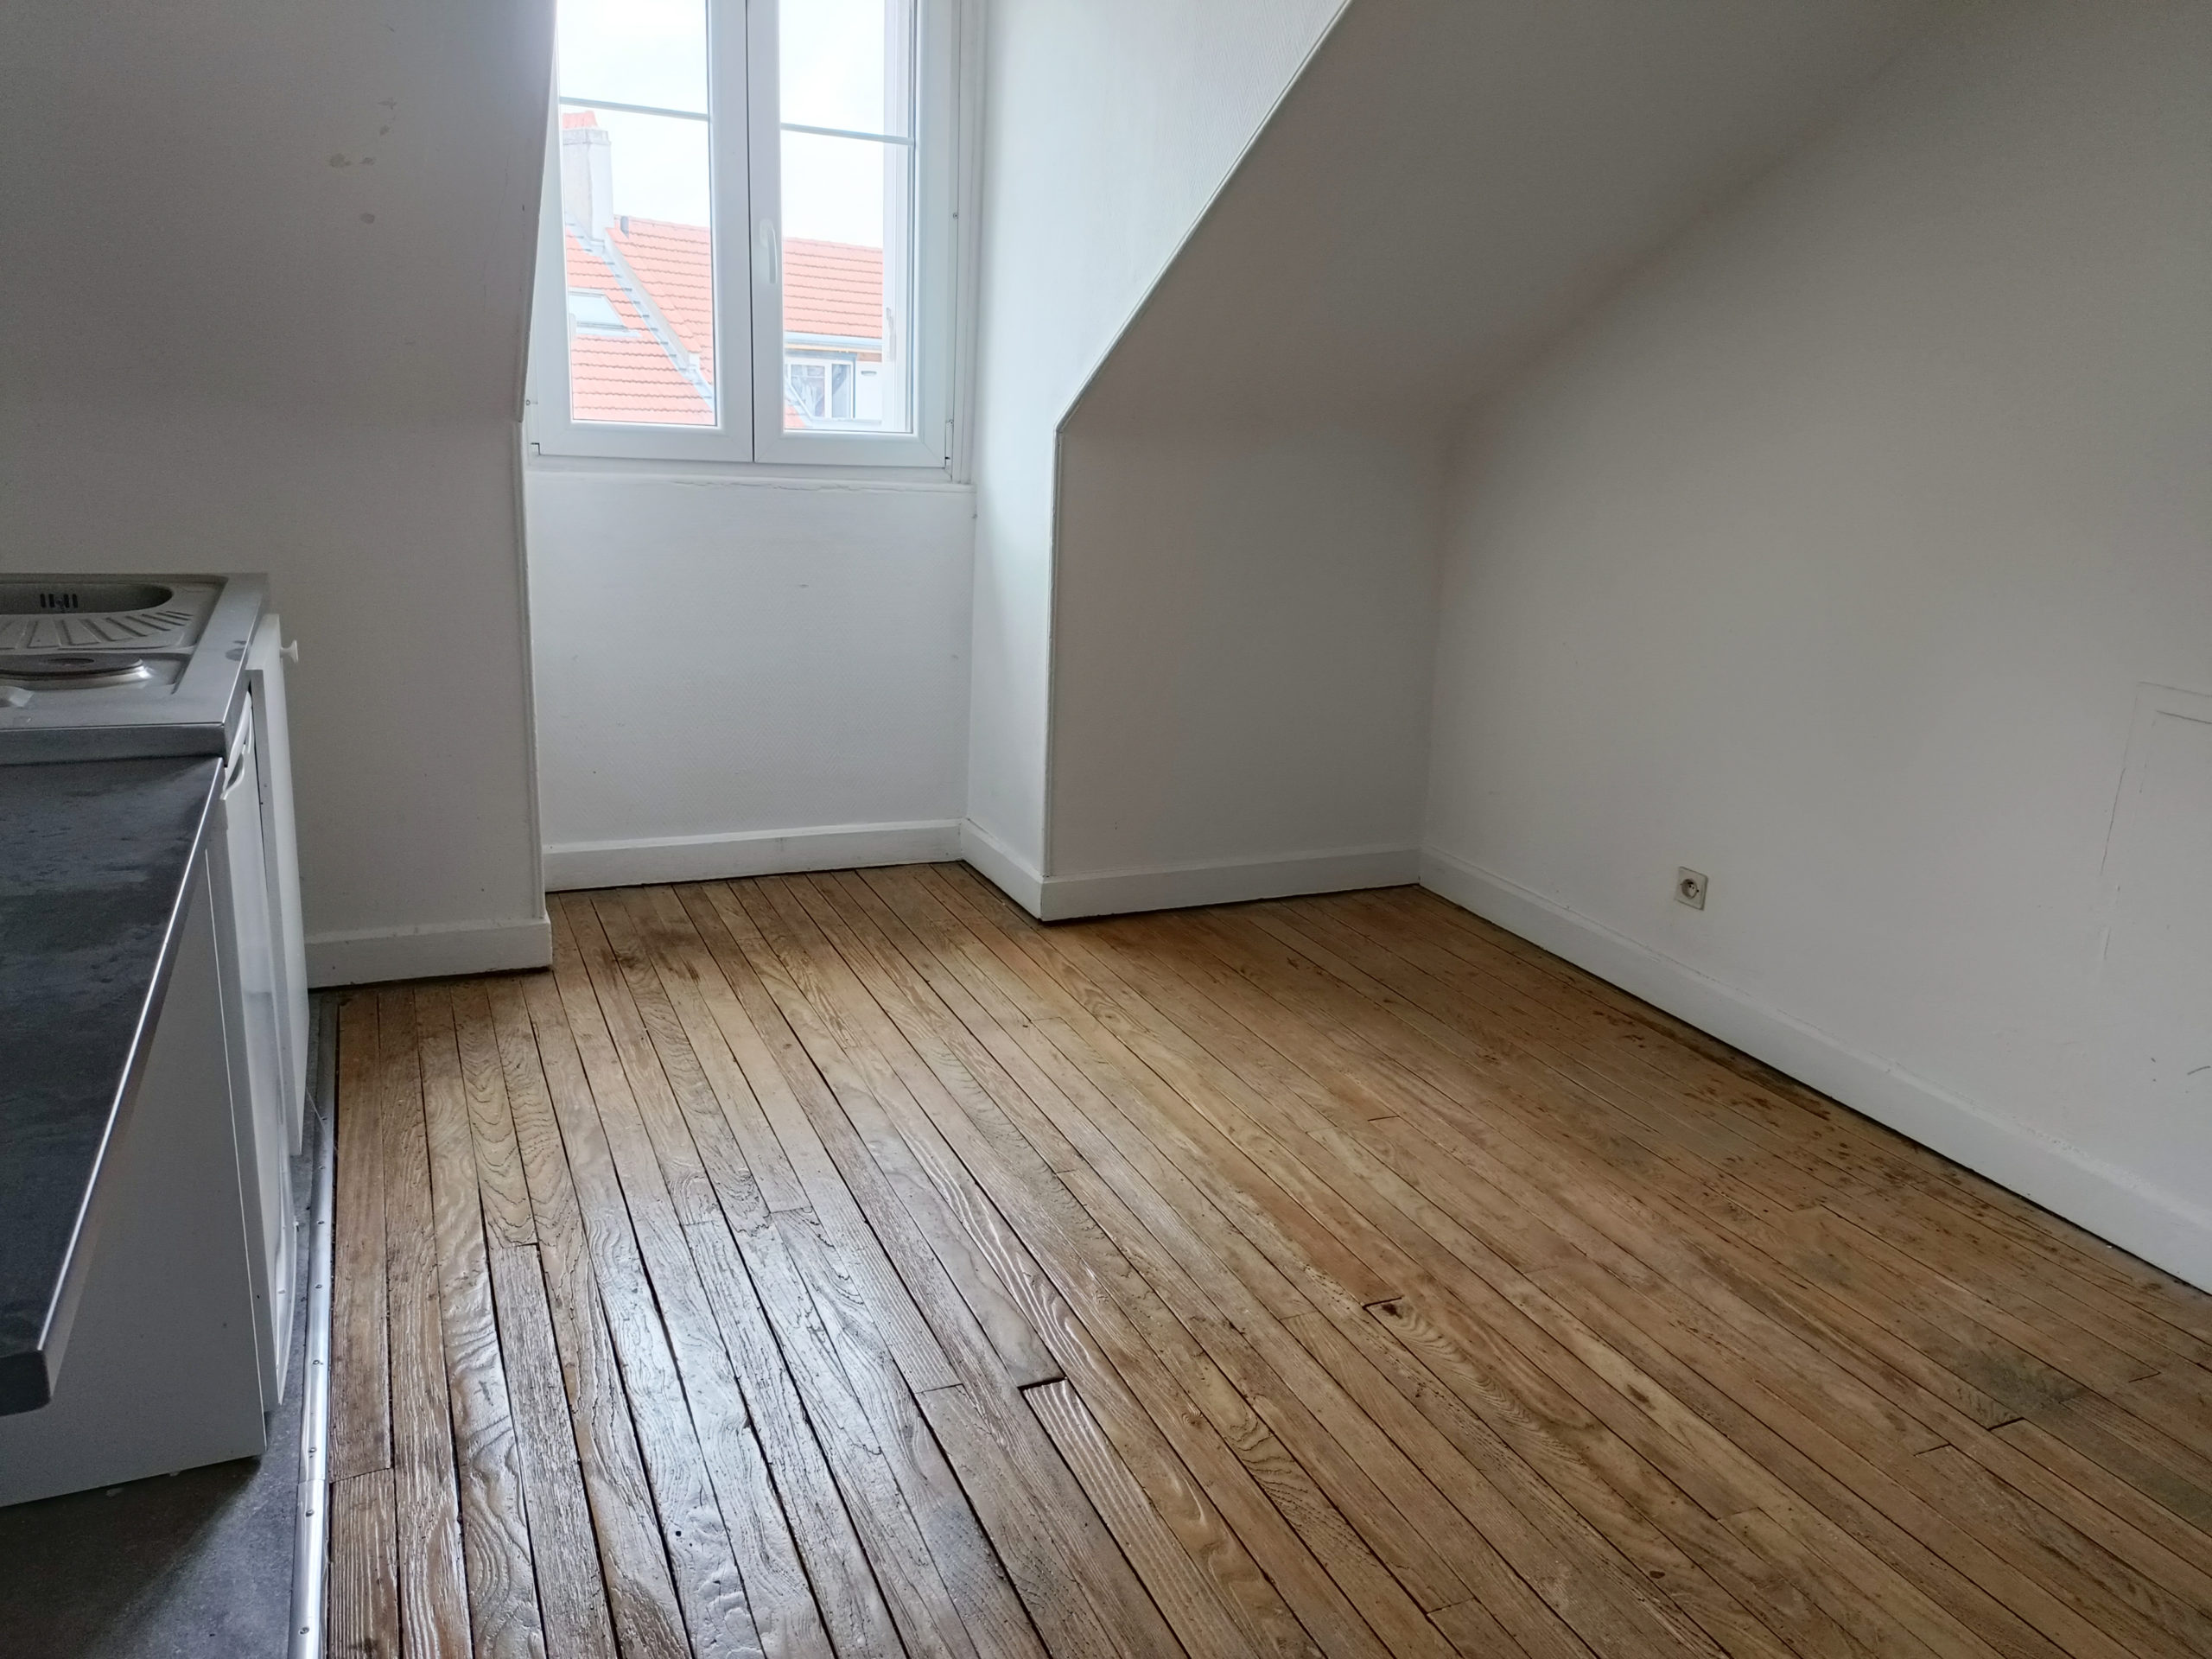 1-Bedroom Apartment with Renovation Potential – 42 m² – Metz, Sainte-Thérèse Area – Near the Train Station